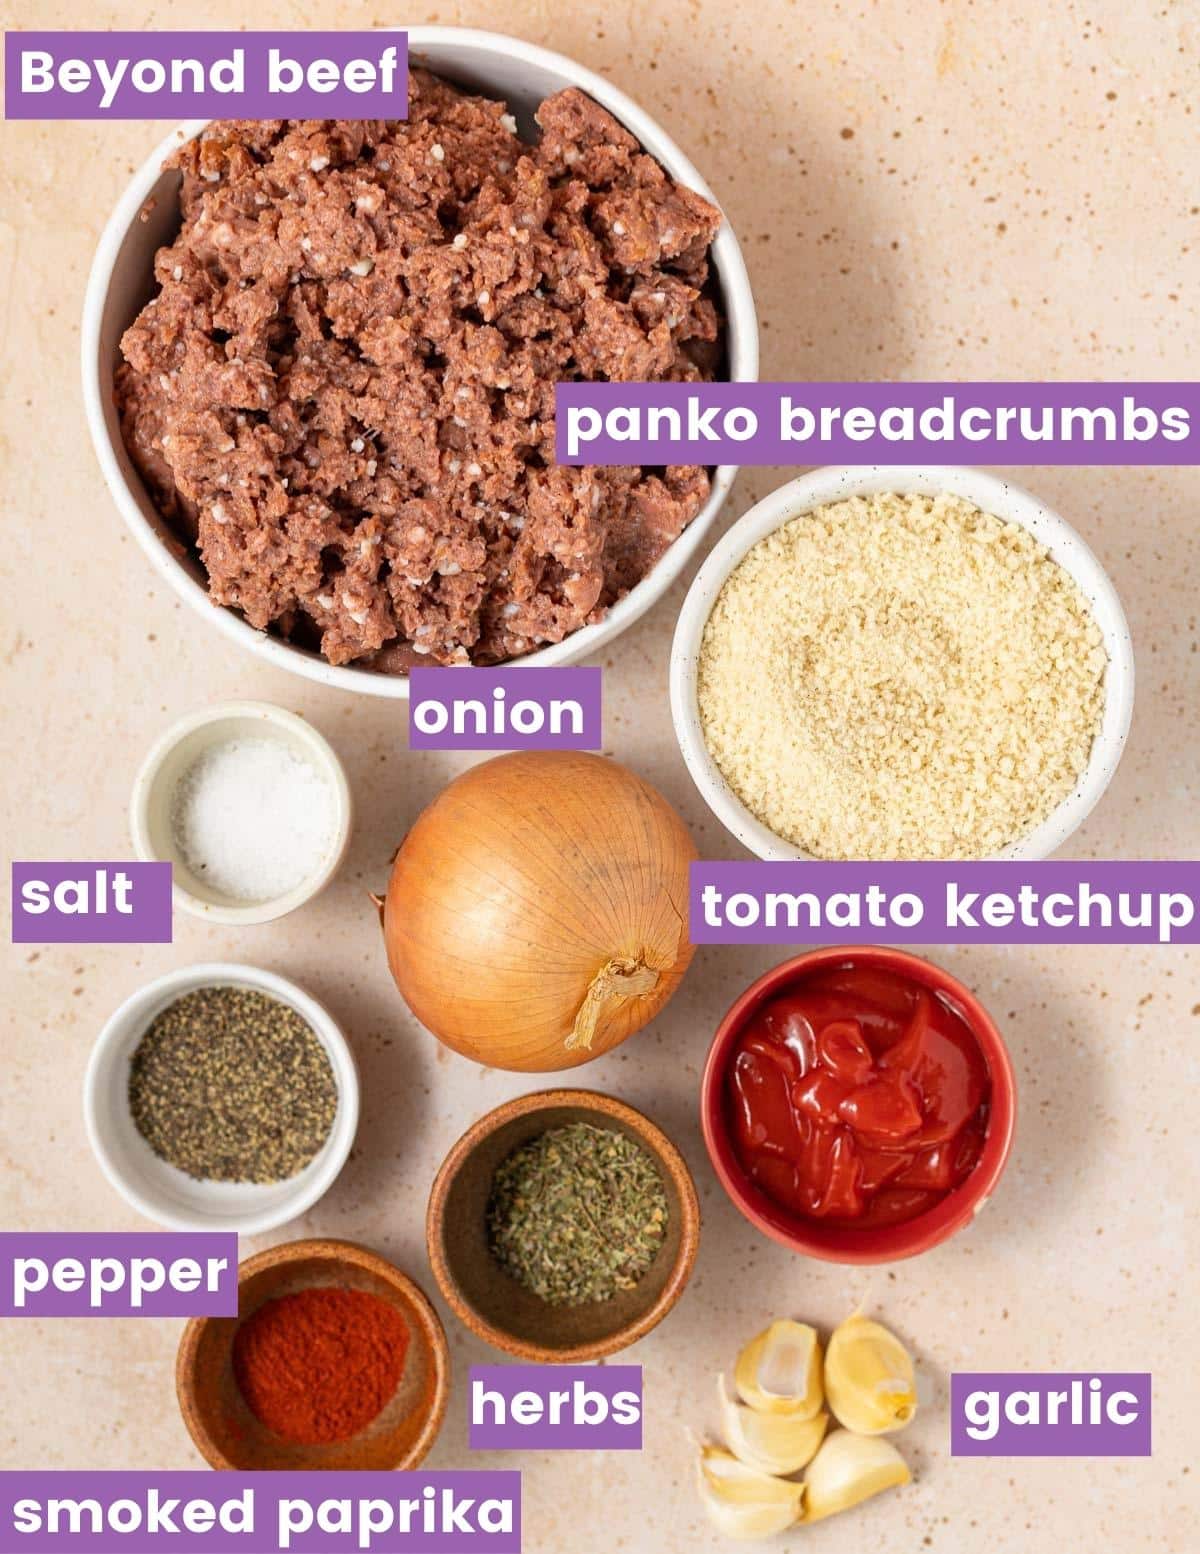 ingredients for beyond meat meatloaf as per the written ingredient list 